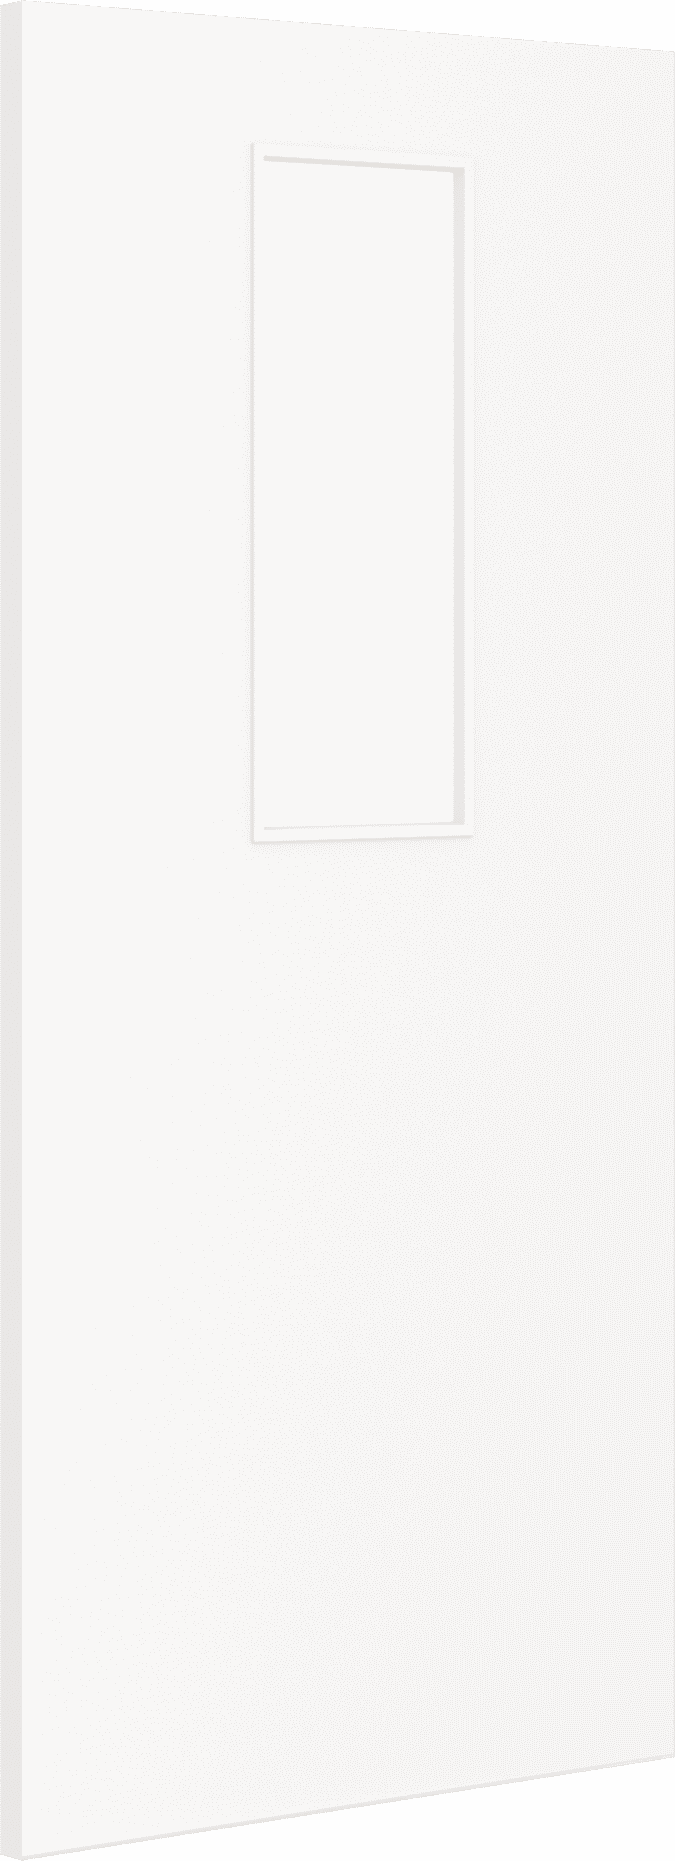 1981mm x 762mm x 44mm (30") Architectural Paint Grade White 14 Clear Glazed Fire Door Blank